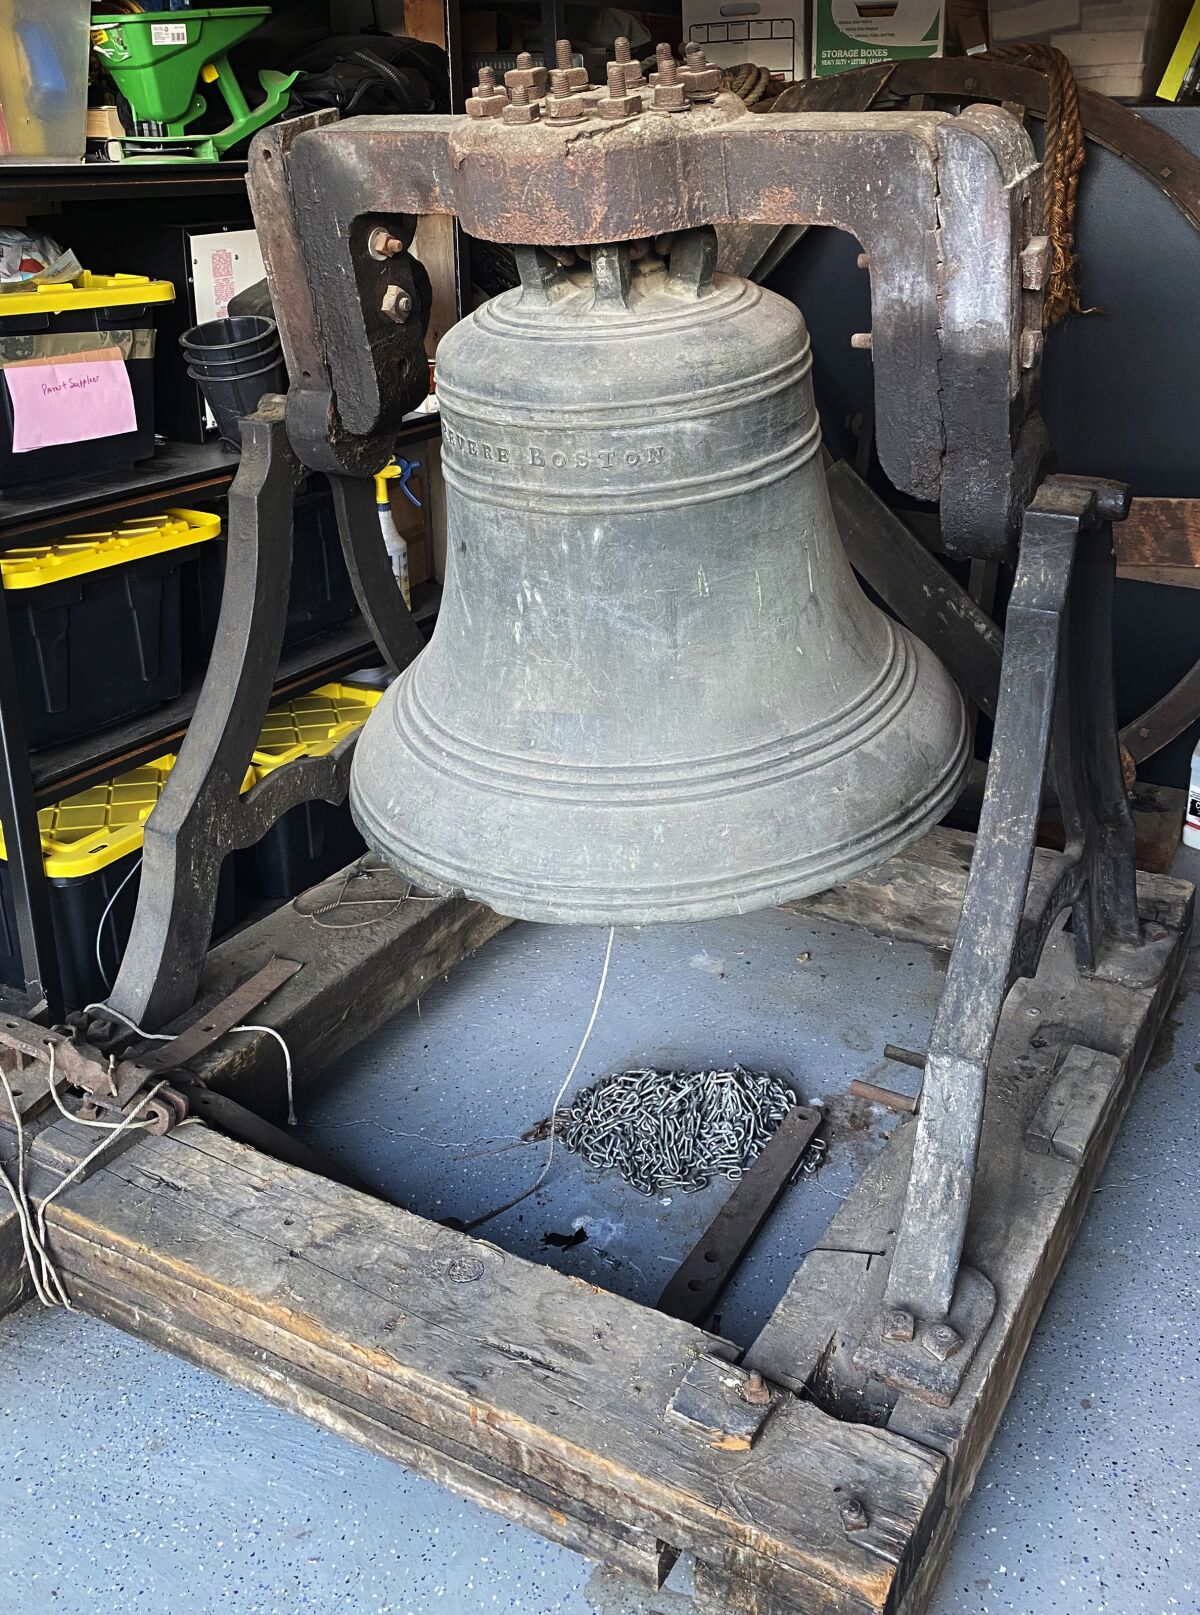 In this handout photograph provided by Amy Miller, a bronze bell forged in 1834 by Paul Revere's son, Joseph Warren Revere, is readied for shipping in Chino Hills, Calif., on Feb. 8, 2022, for transport to the Paul Revere Heritage Site in Canton, Massachusetts. Amy Miller, the daughter of the California couple who acquired the bell in 1984, says she and her brother donated it to the museum so the public could view and appreciate it. (Amy Miller photo via AP)